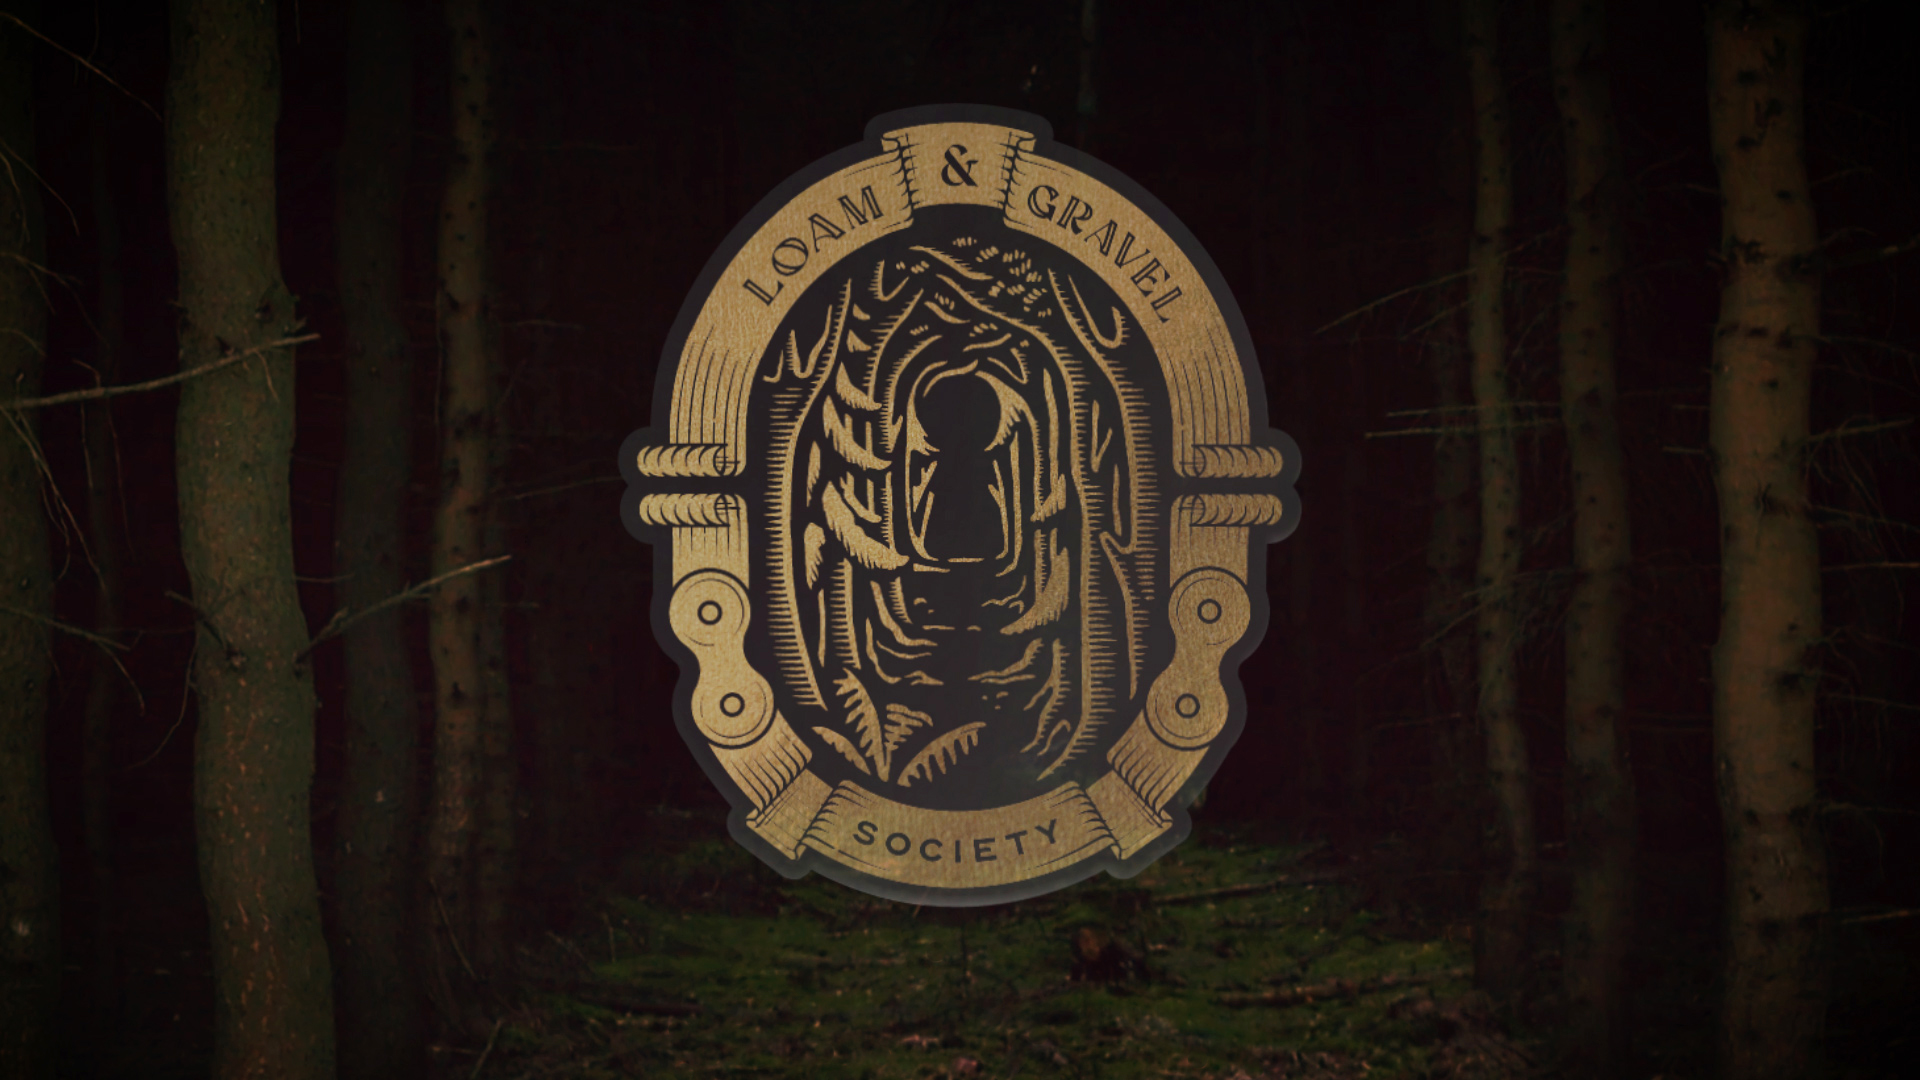 Loam and Gravel Society Announcement image